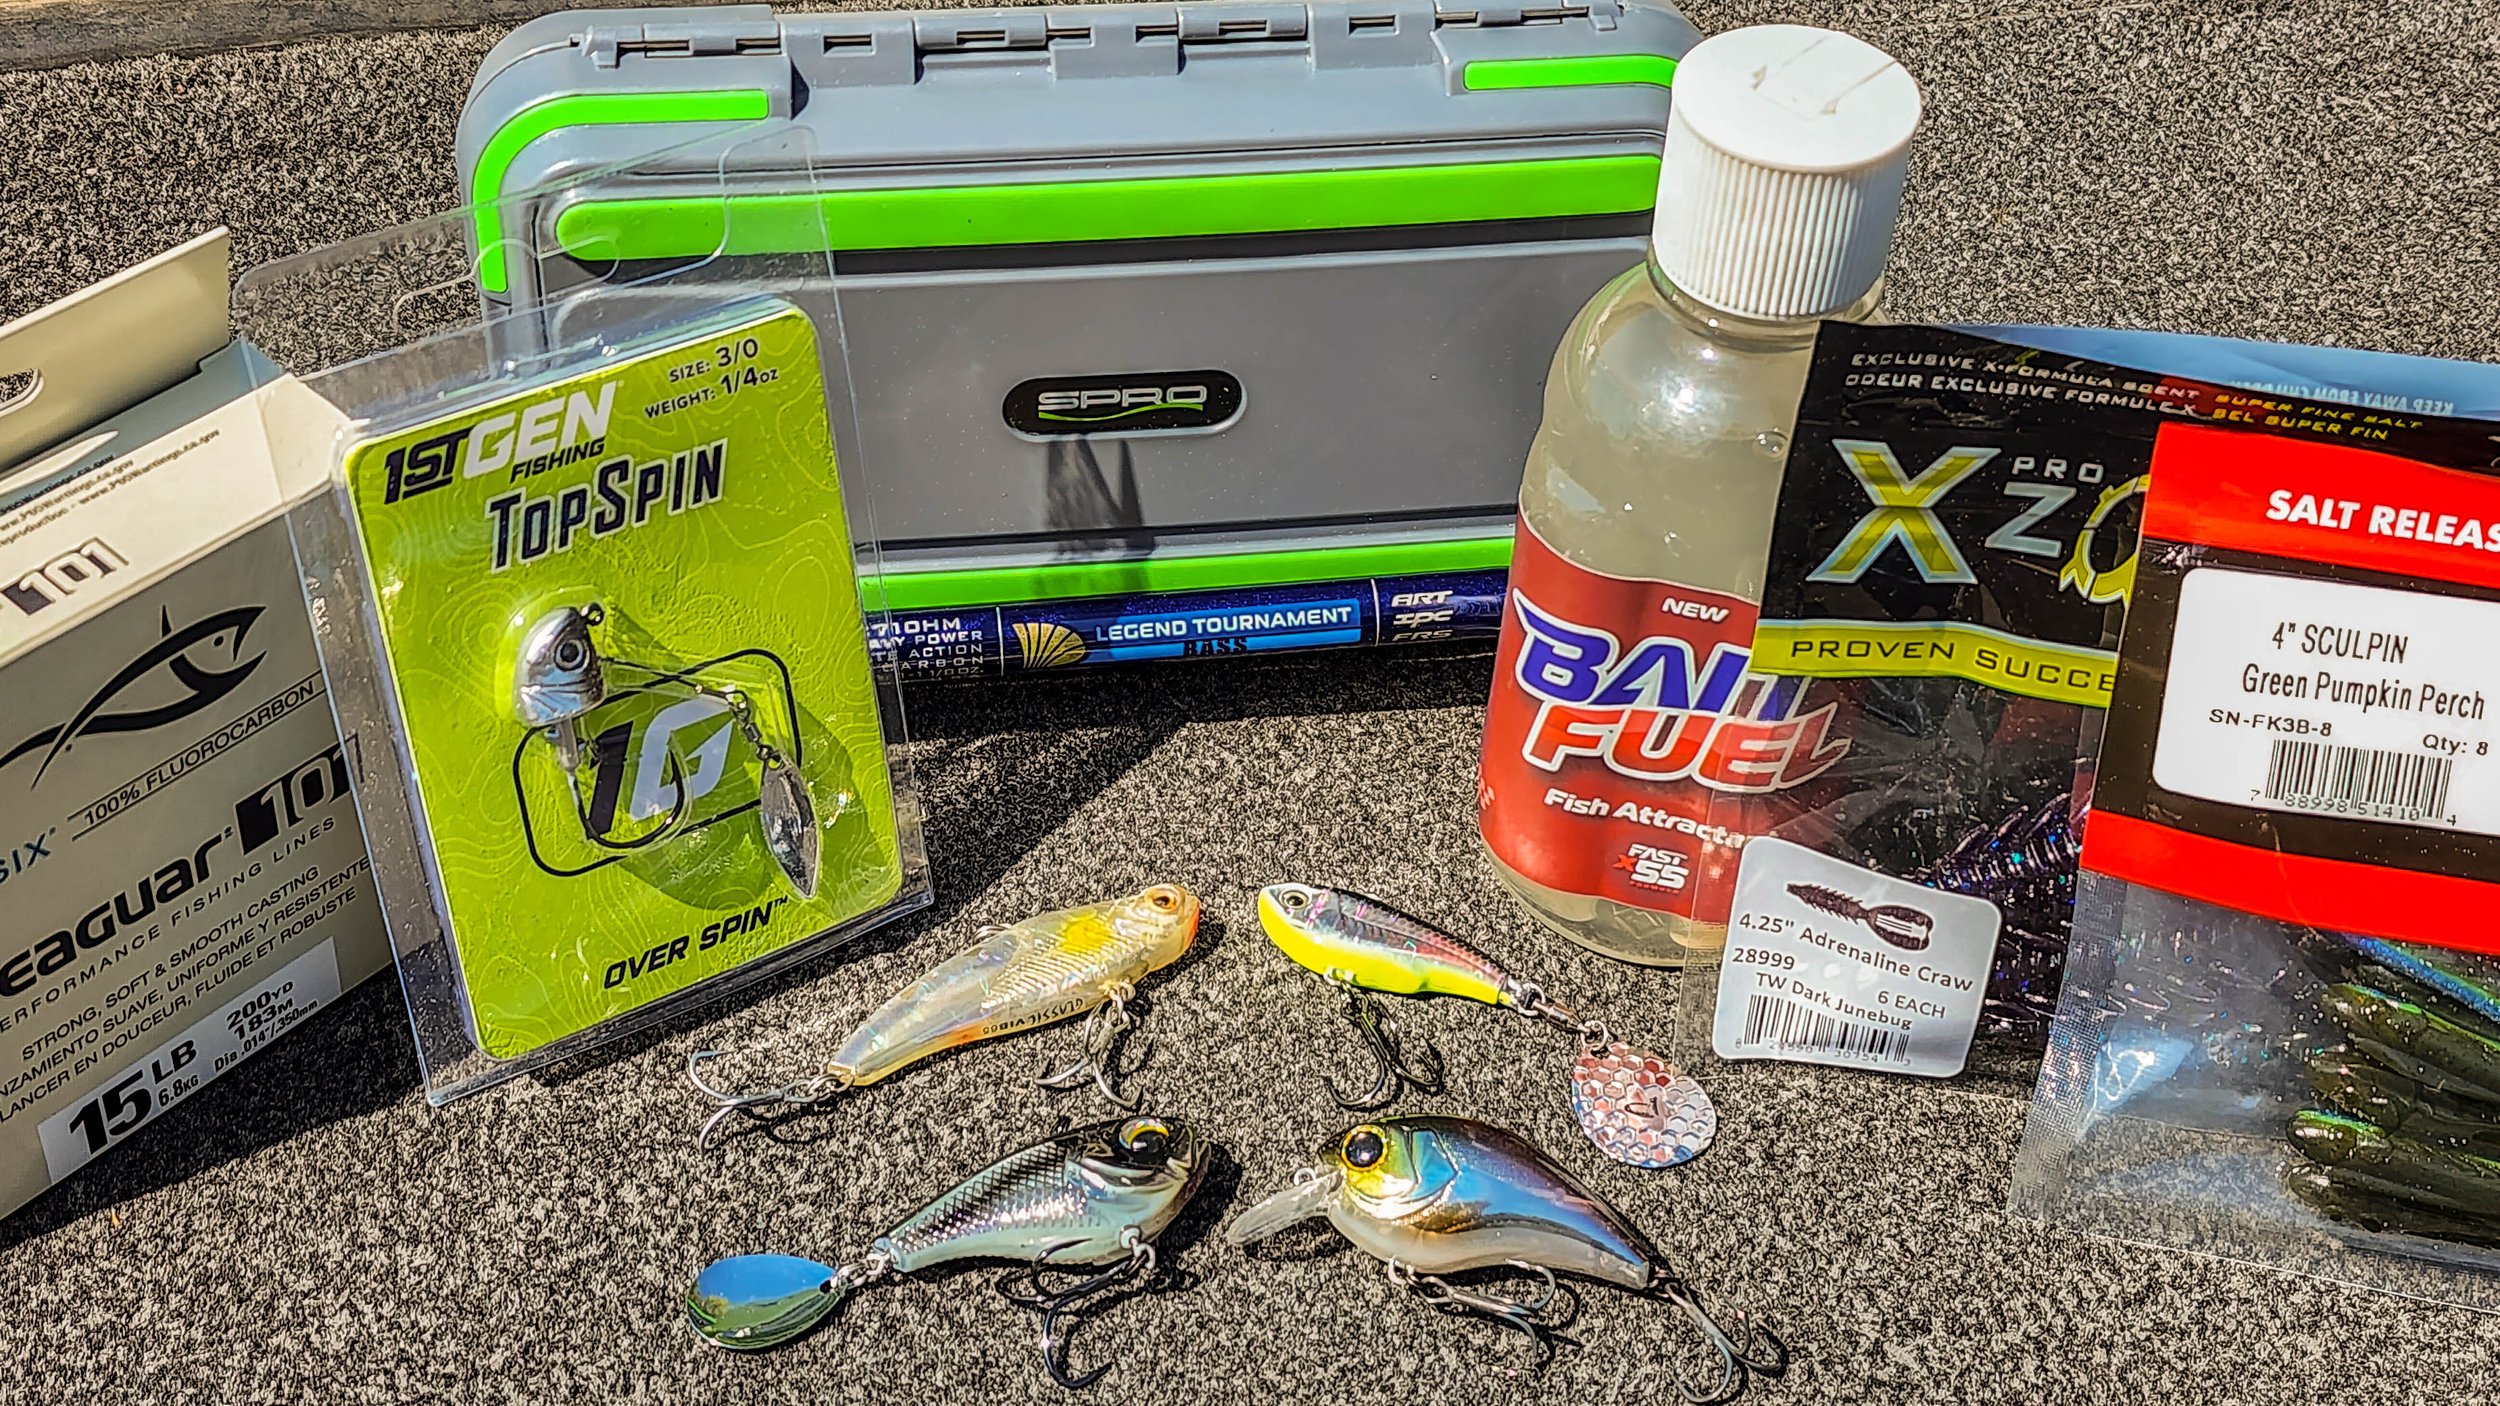 Bass Fishing Gear Review! The Hottest New Baits, Hooks, And Gear